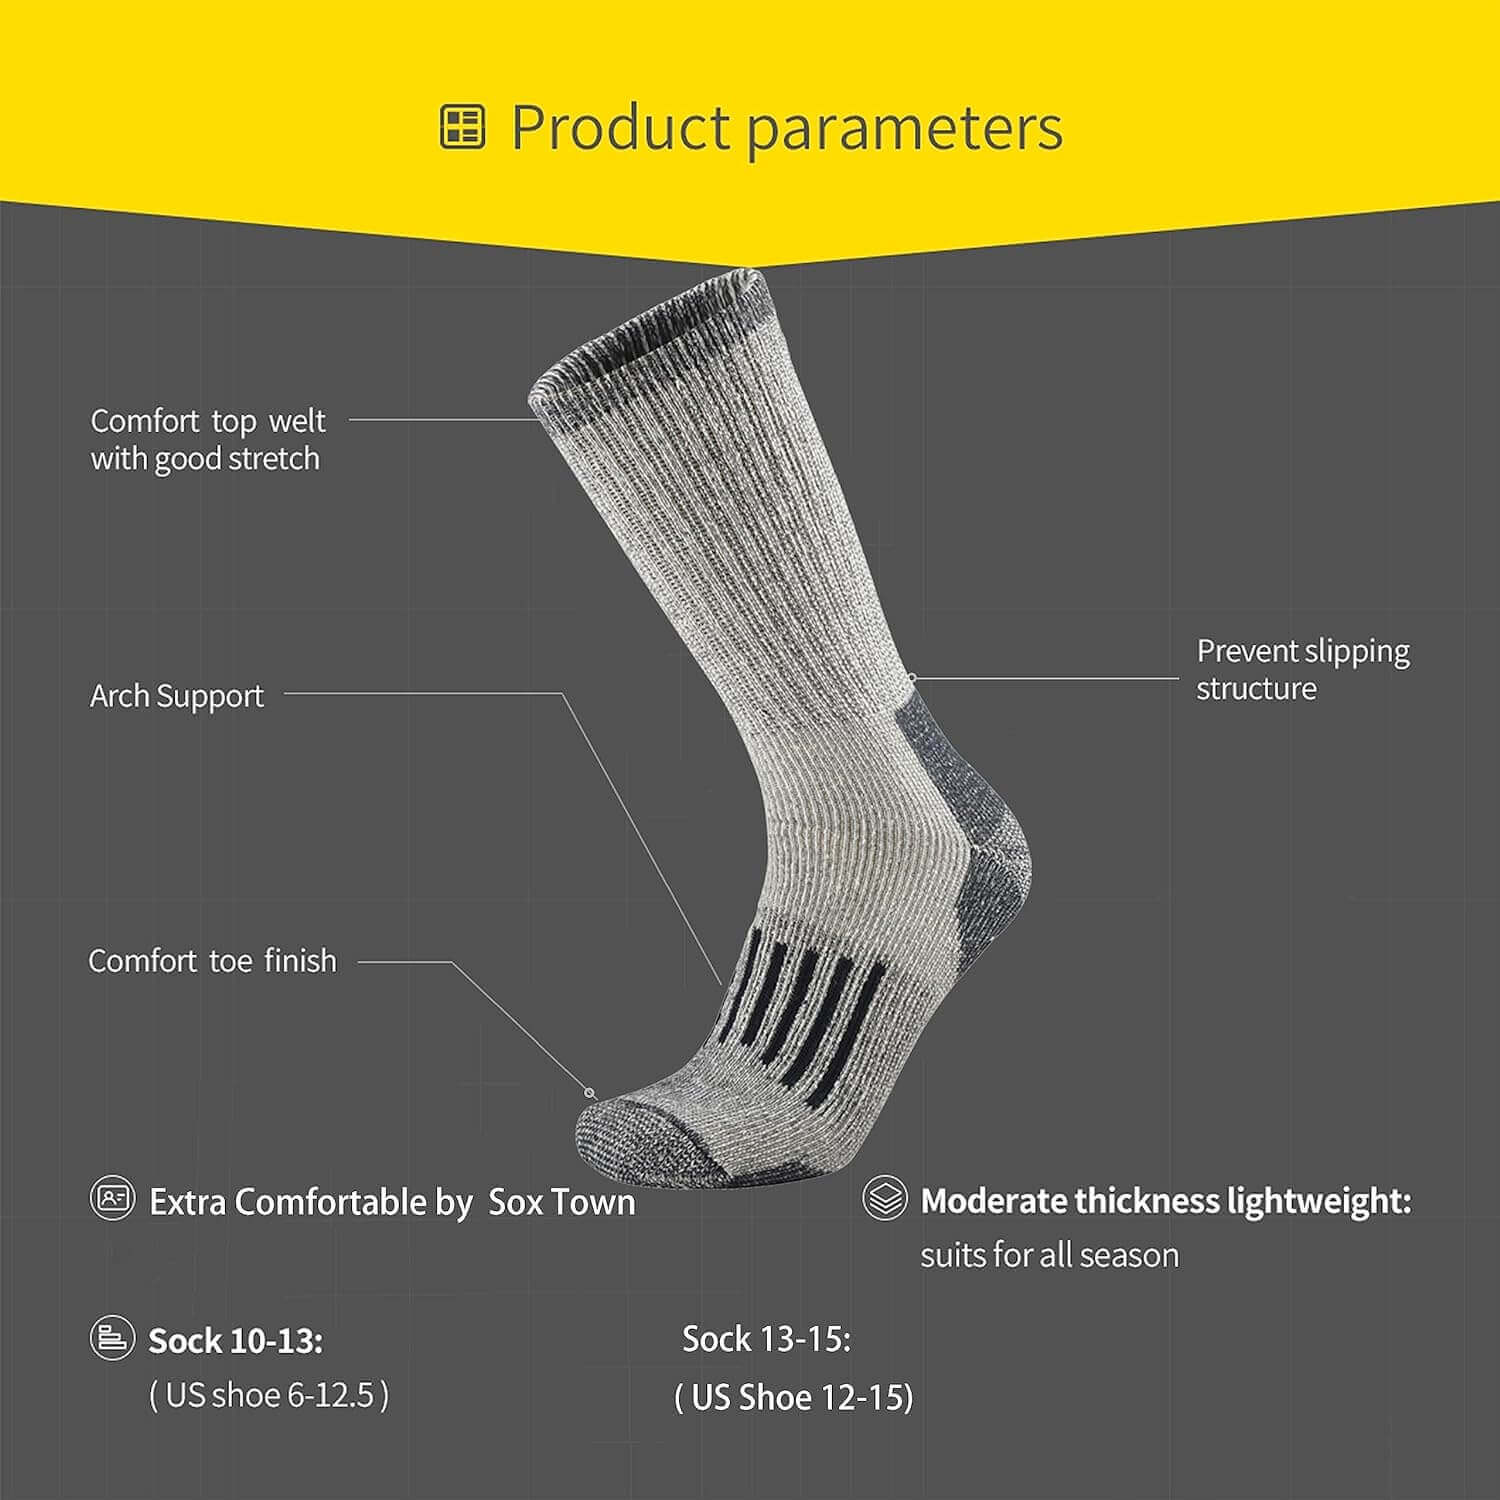 Shop The Latest >SOX TOWN Men's Merino Wool Cushion Crew Socks > *Only $32.19*> From The Top Brand > *Sox Townl* > Shop Now and Get Free Shipping On Orders Over $45.00 >*Shop Earth Foot*